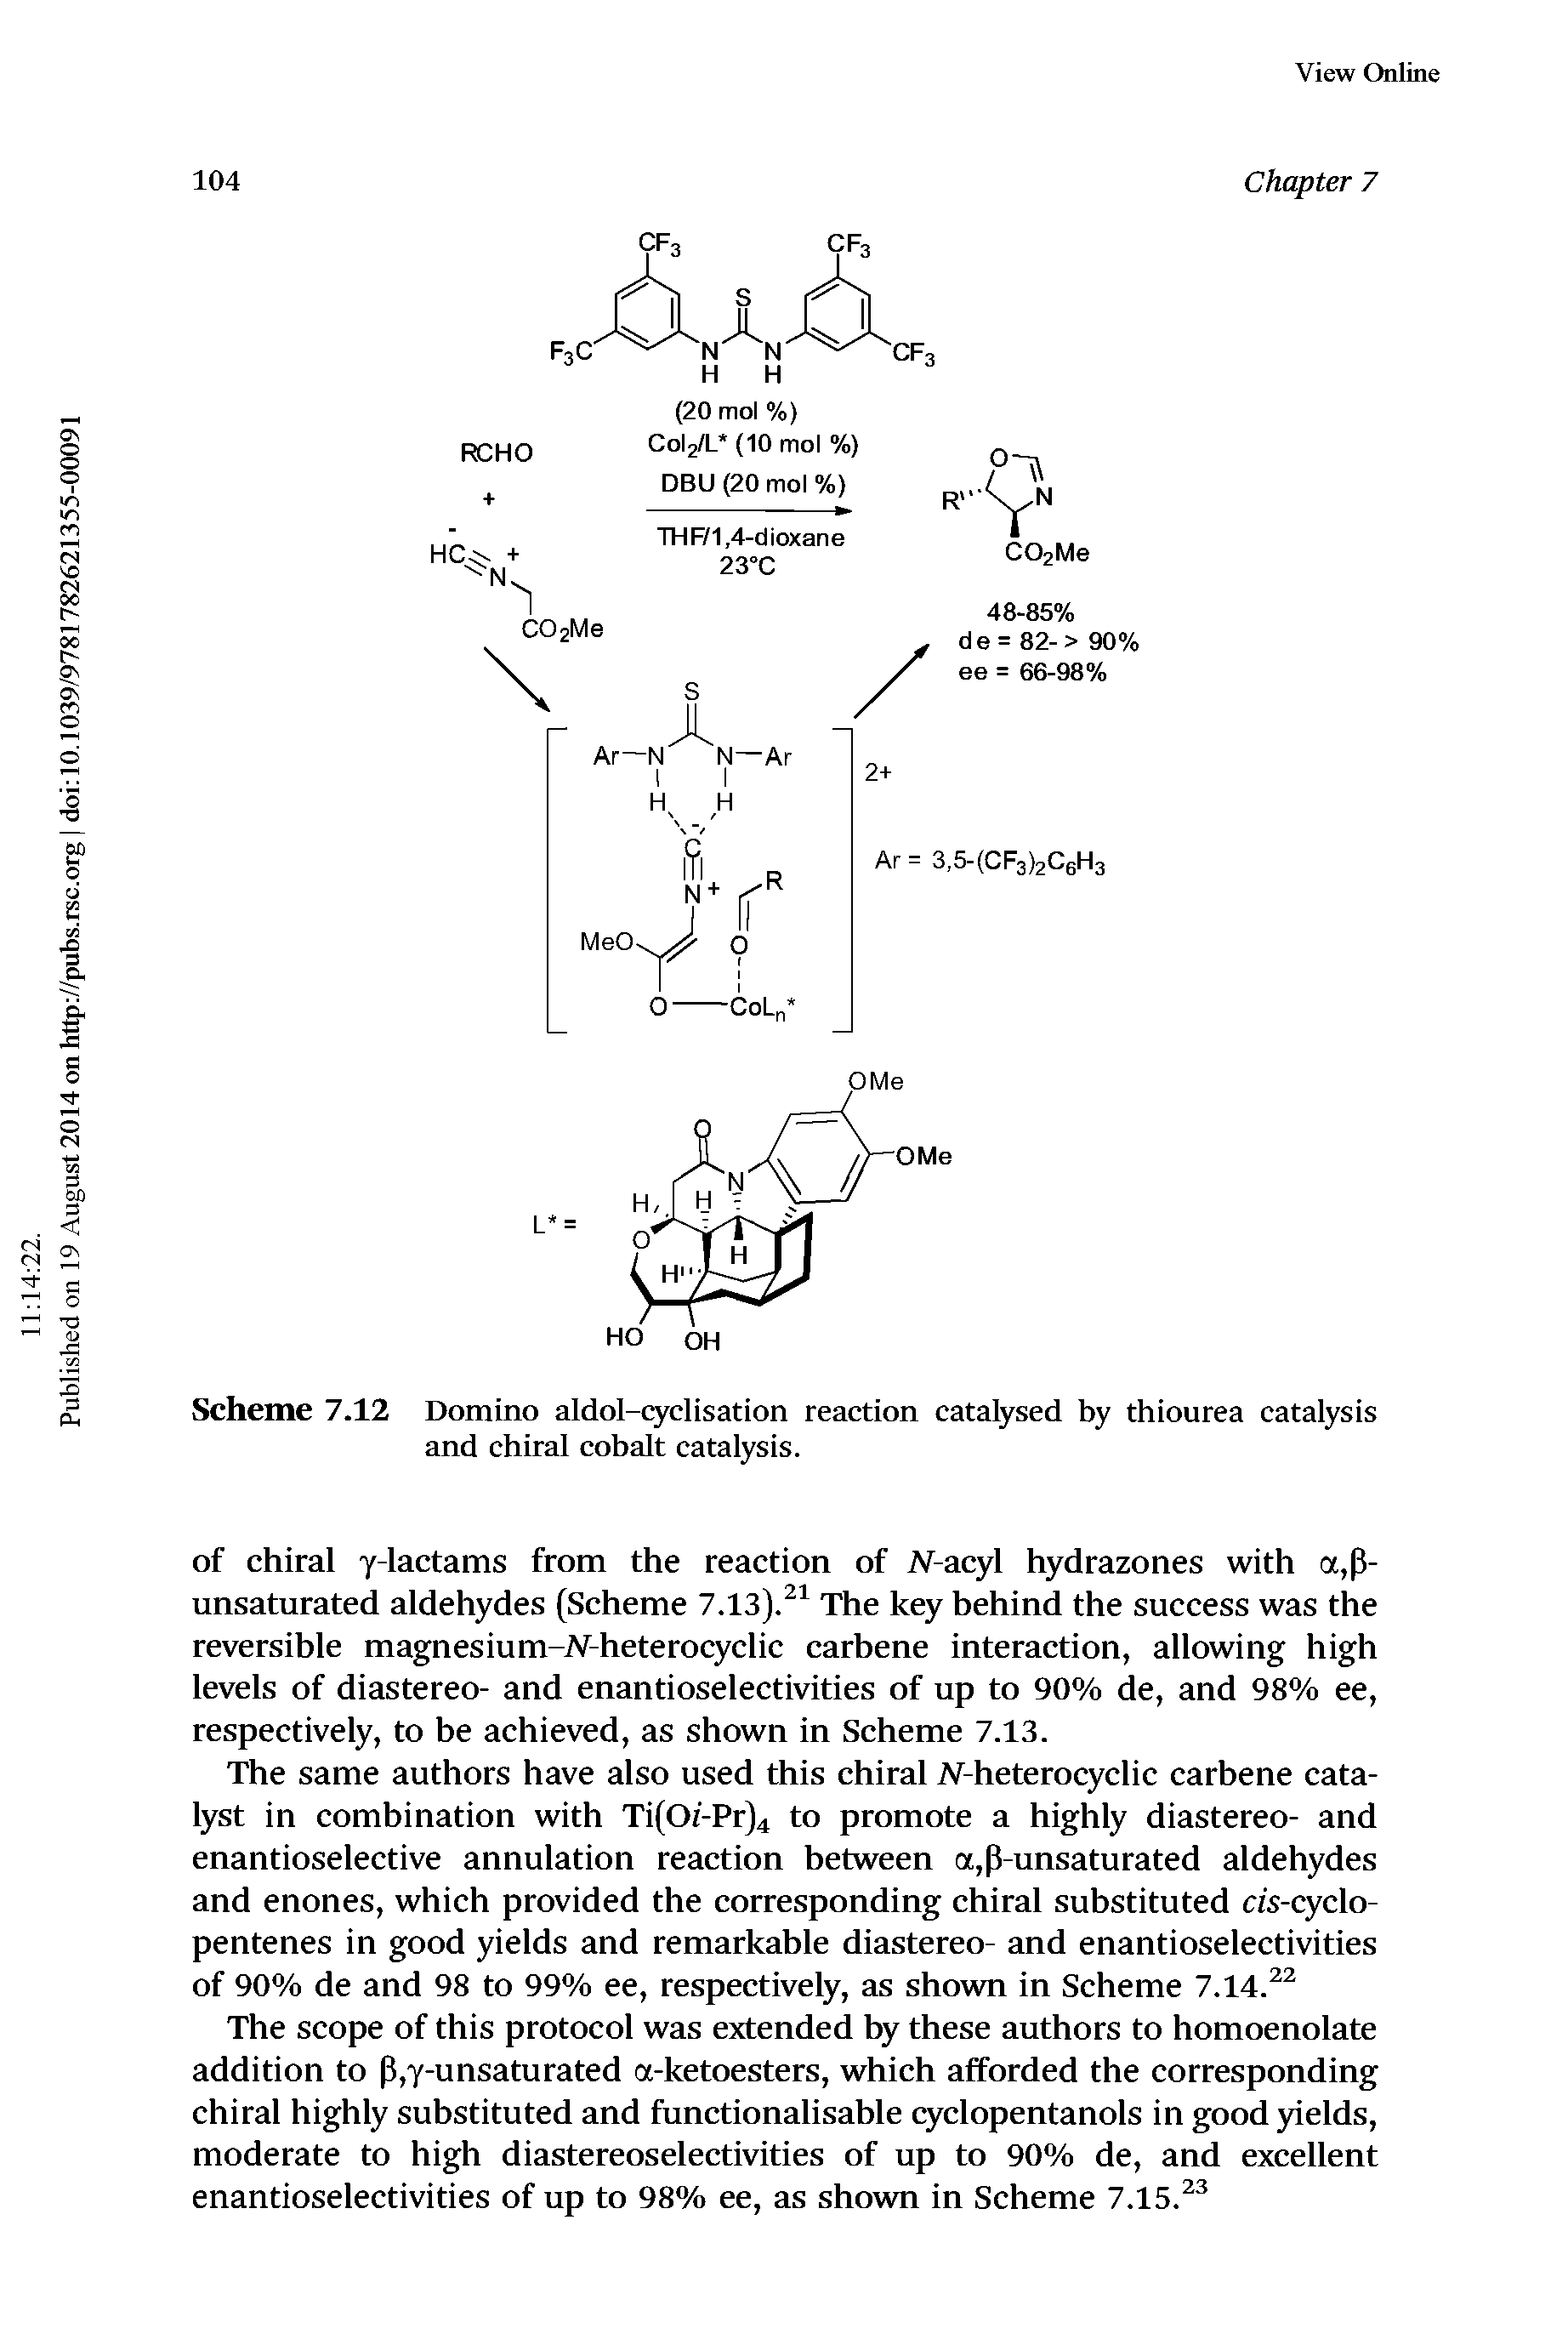 Scheme 7.12 Domino aldol-q clisation reaction catalysed by thiourea catalysis and chiral cobalt catalysis.